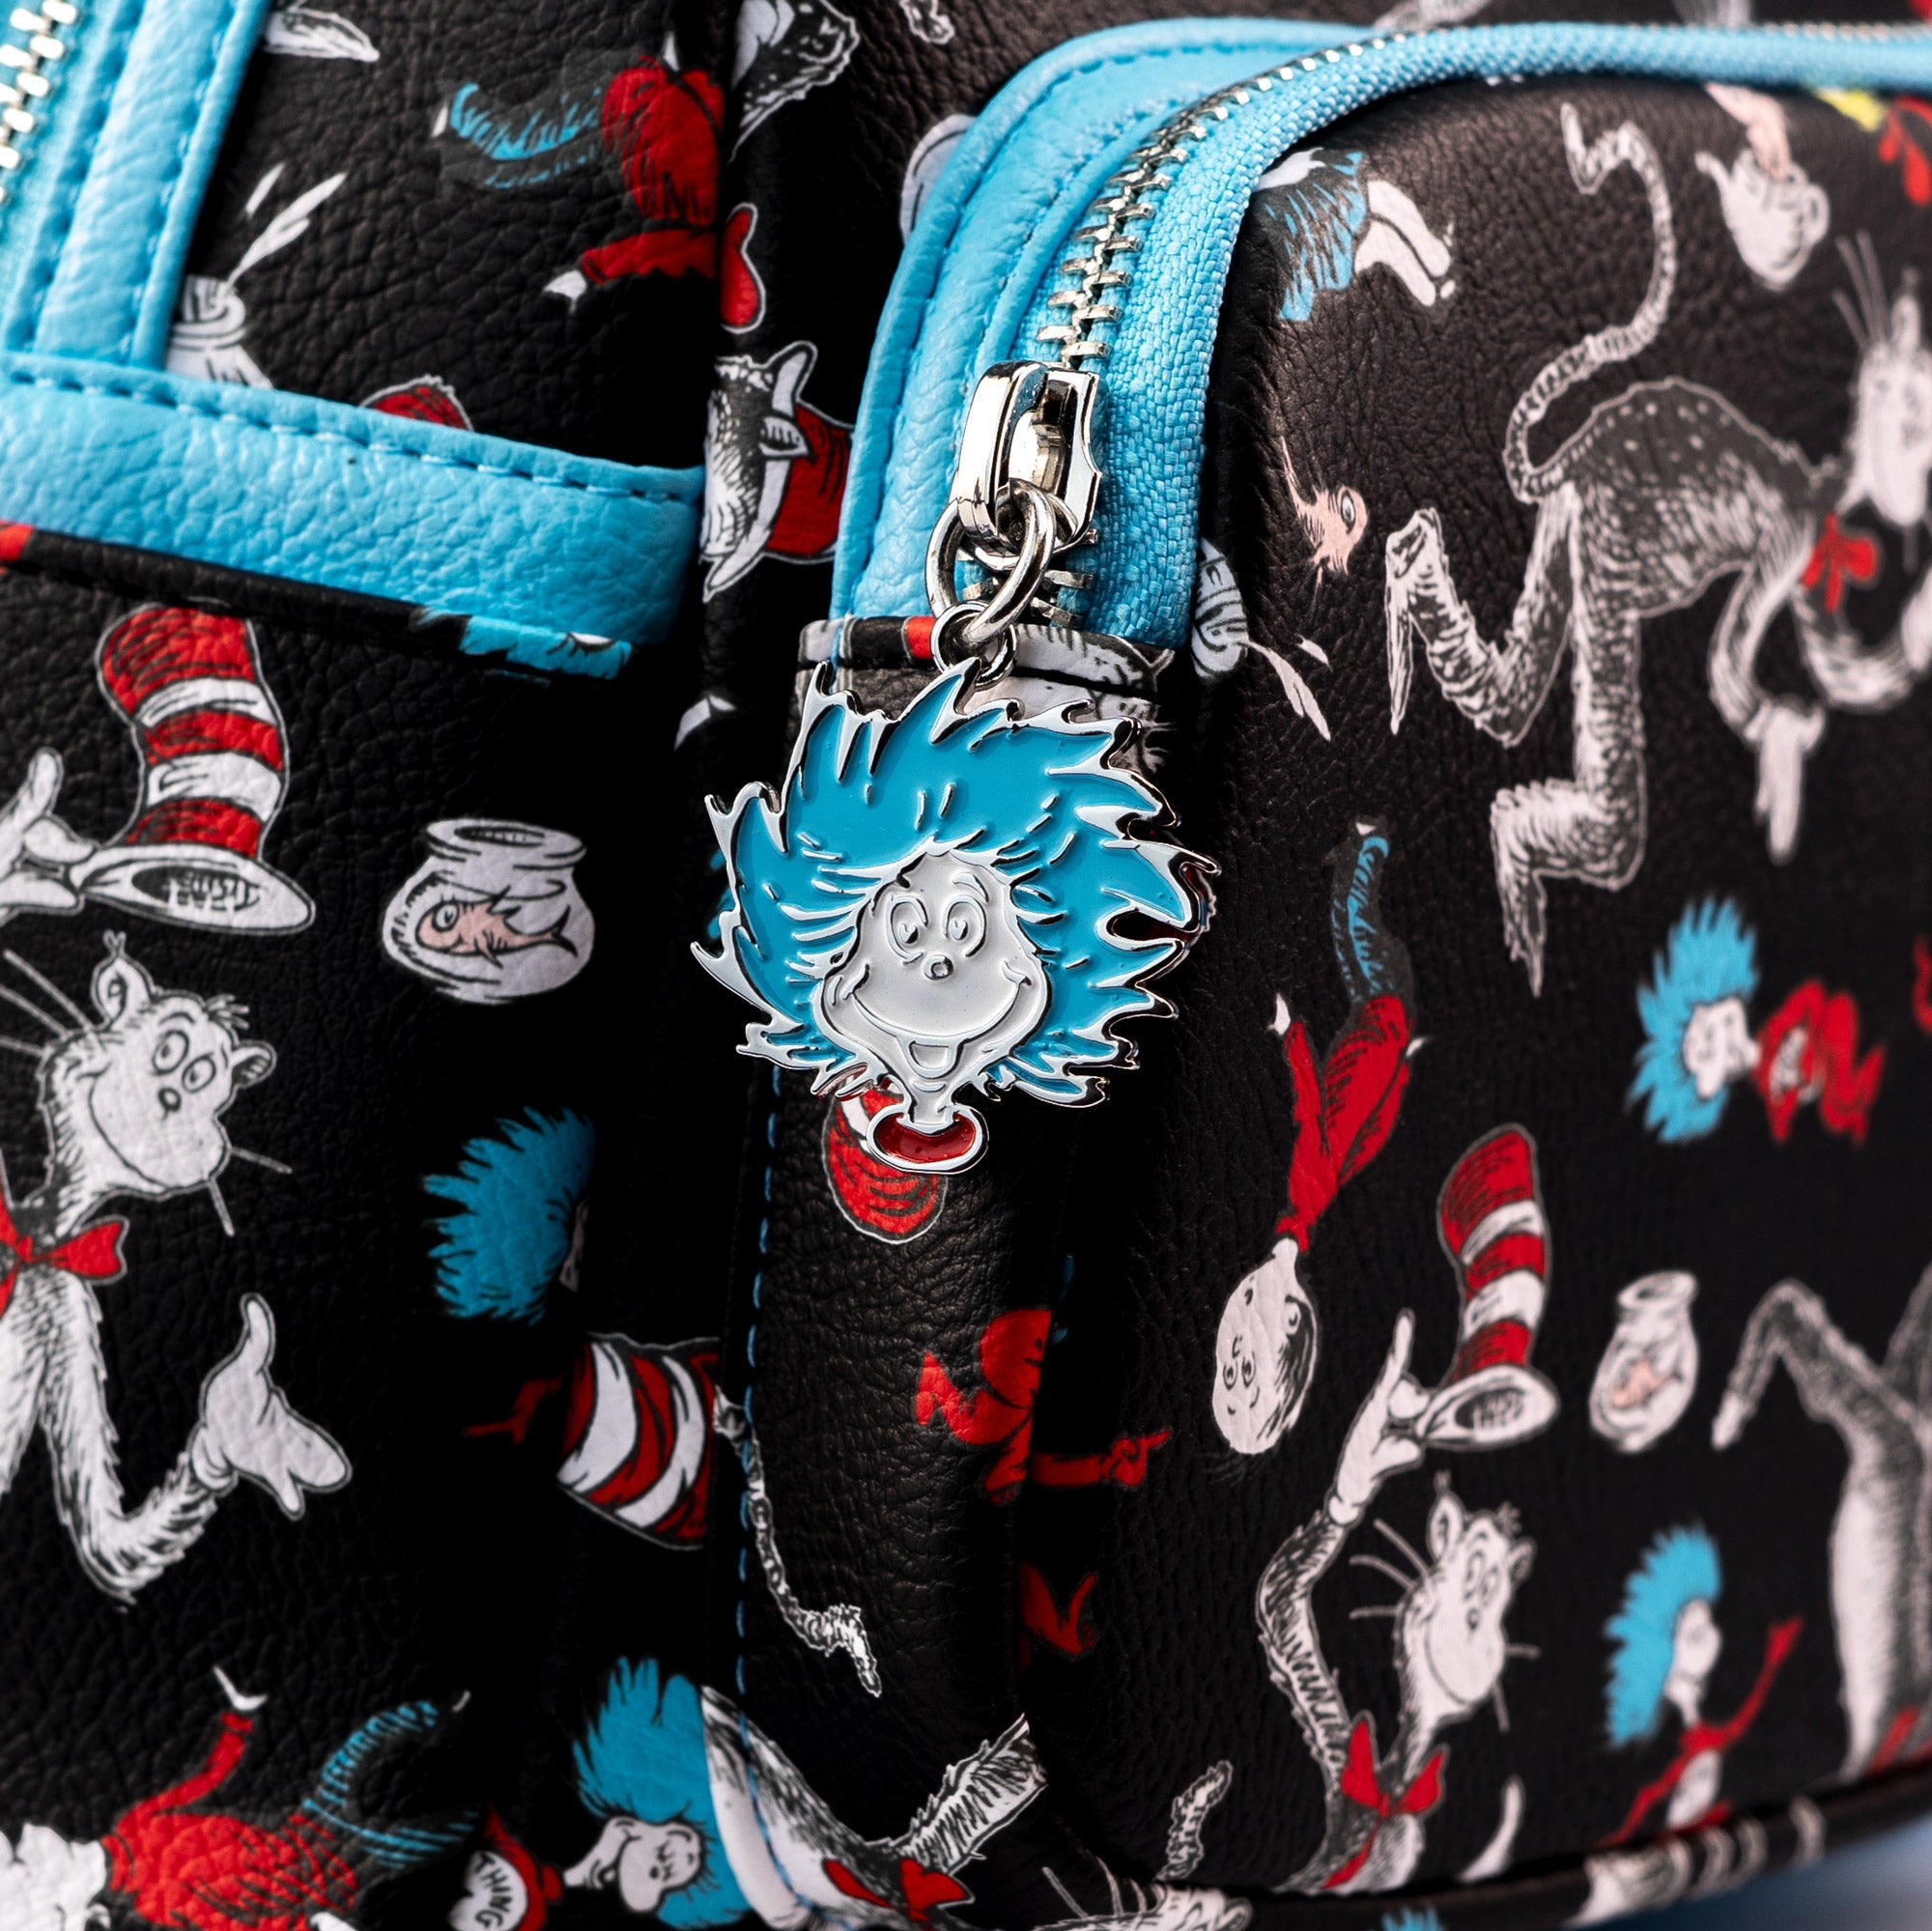 Loungefly x Dr. Seuss The Cat in the Hat AOP Mini Backpack - GeekCore